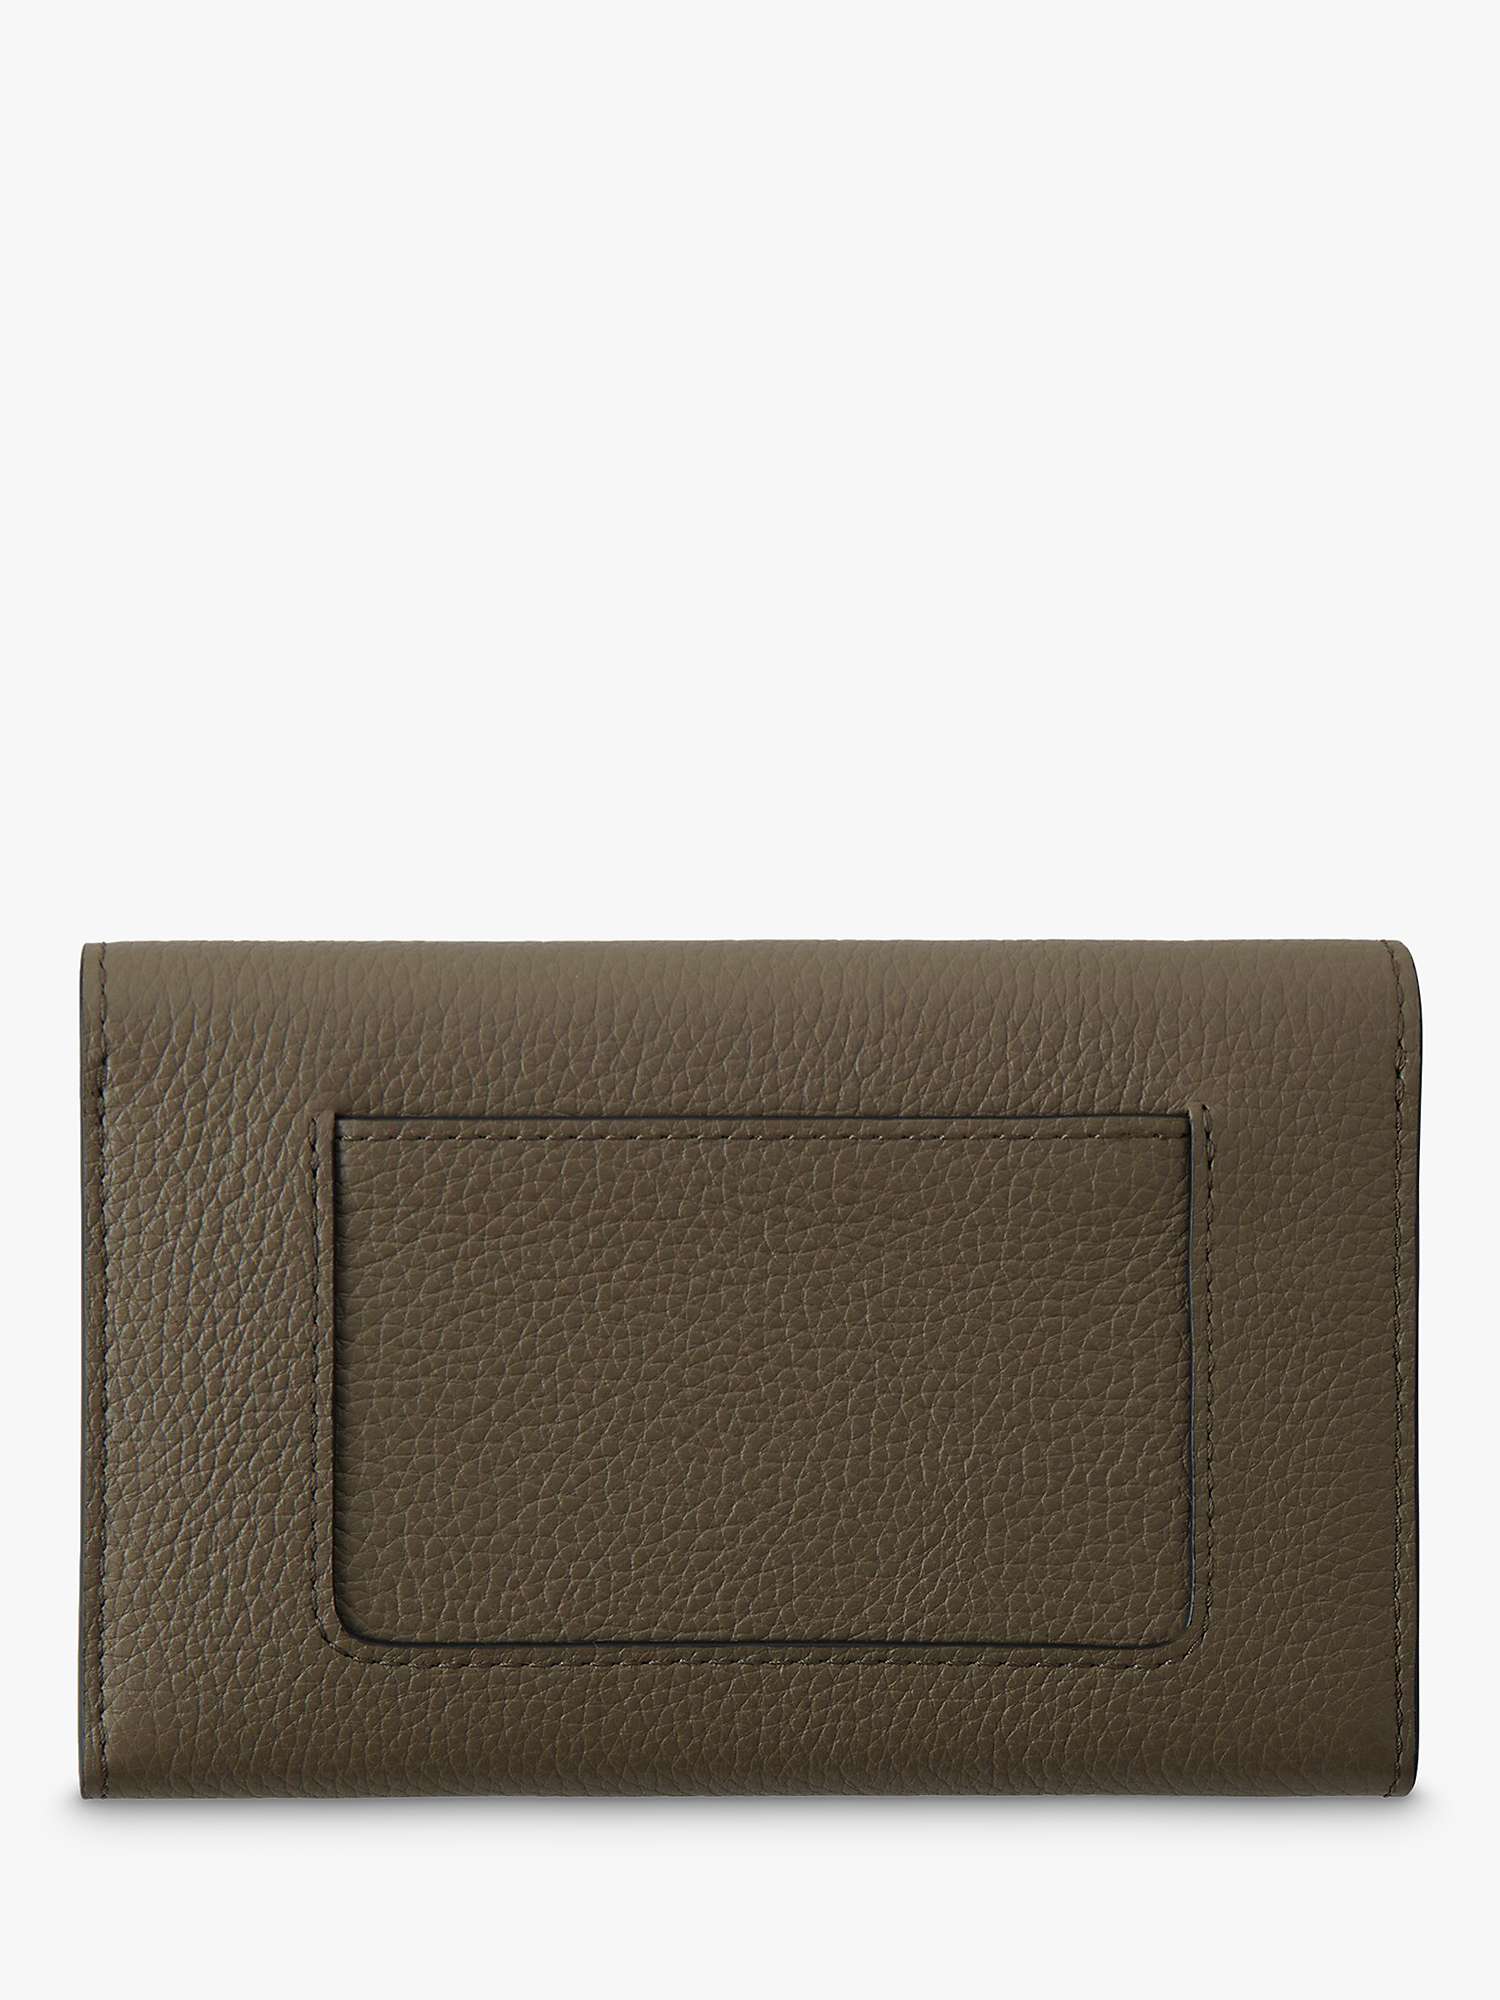 Buy Mulberry Small Classic Grain Leather Medium Darley Wallet Online at johnlewis.com